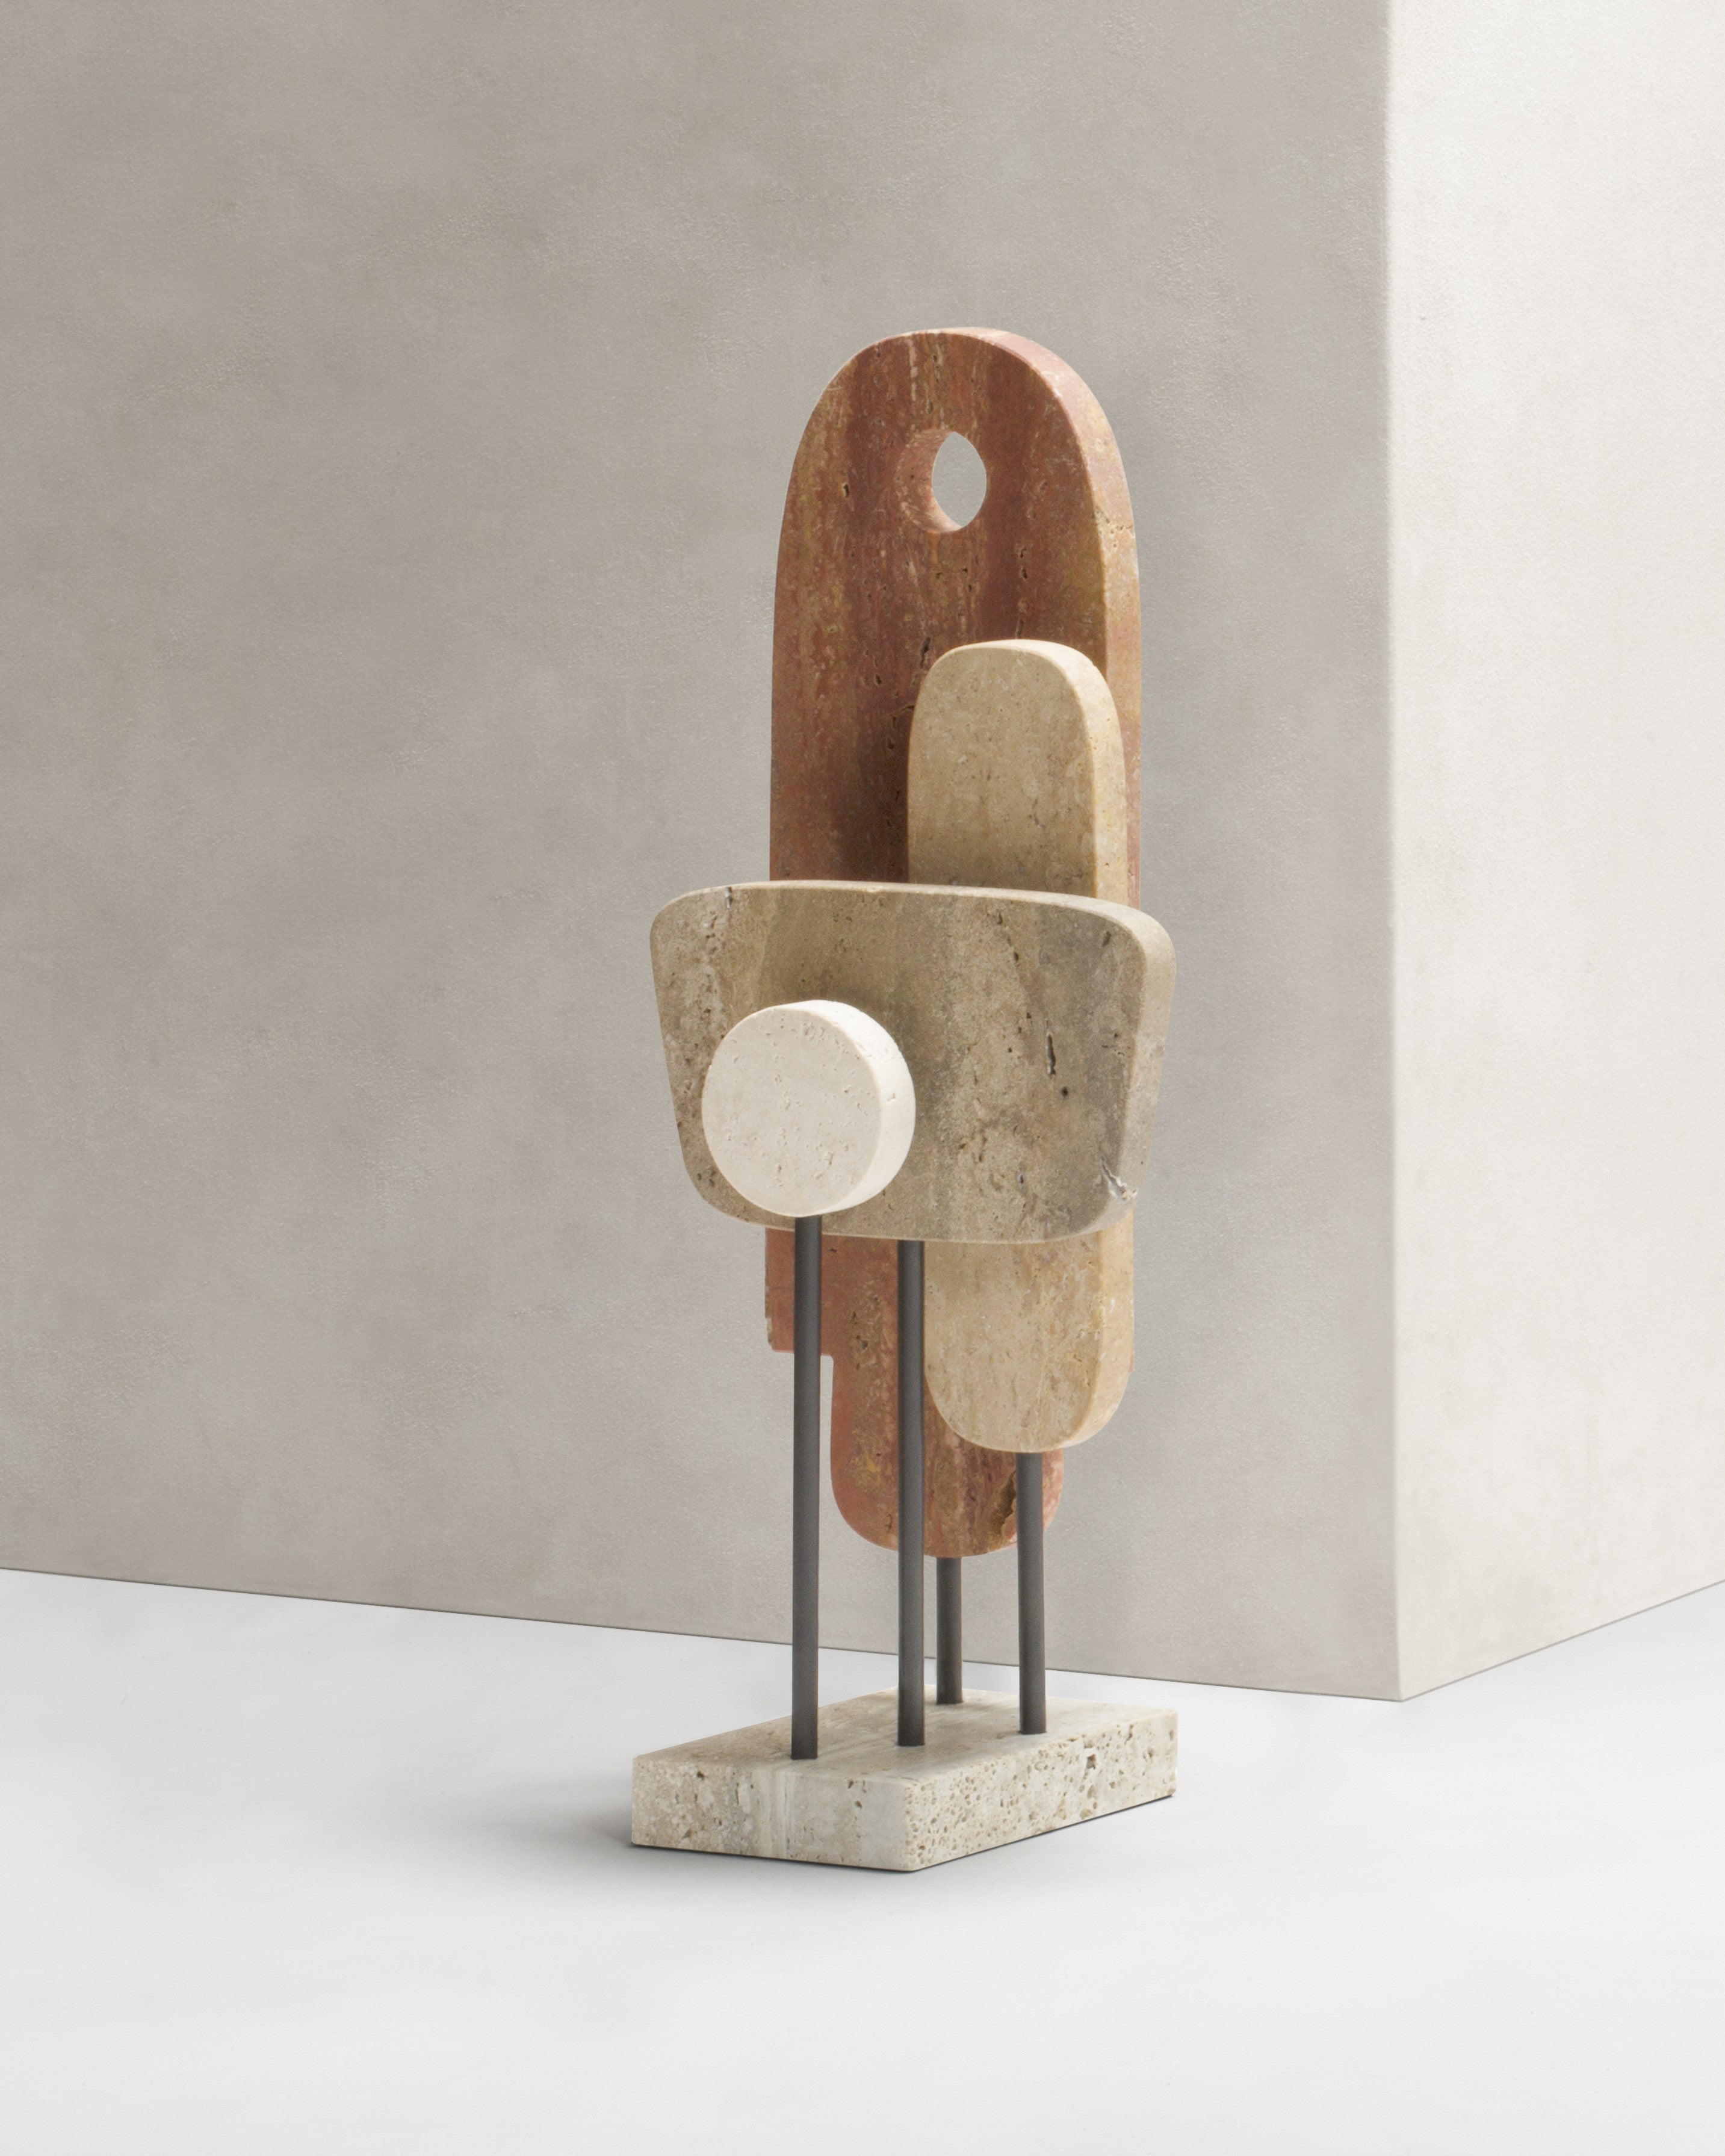 Tabou Marble Sculpture 1 -- Stephane Parmentier x Giobagnara

Available only in marble and bronze finishing.

Embracing sleek designs and beautiful materials, the Stephane Parmentier Collection for Giobagnara epitomizes a commitment to luxurious